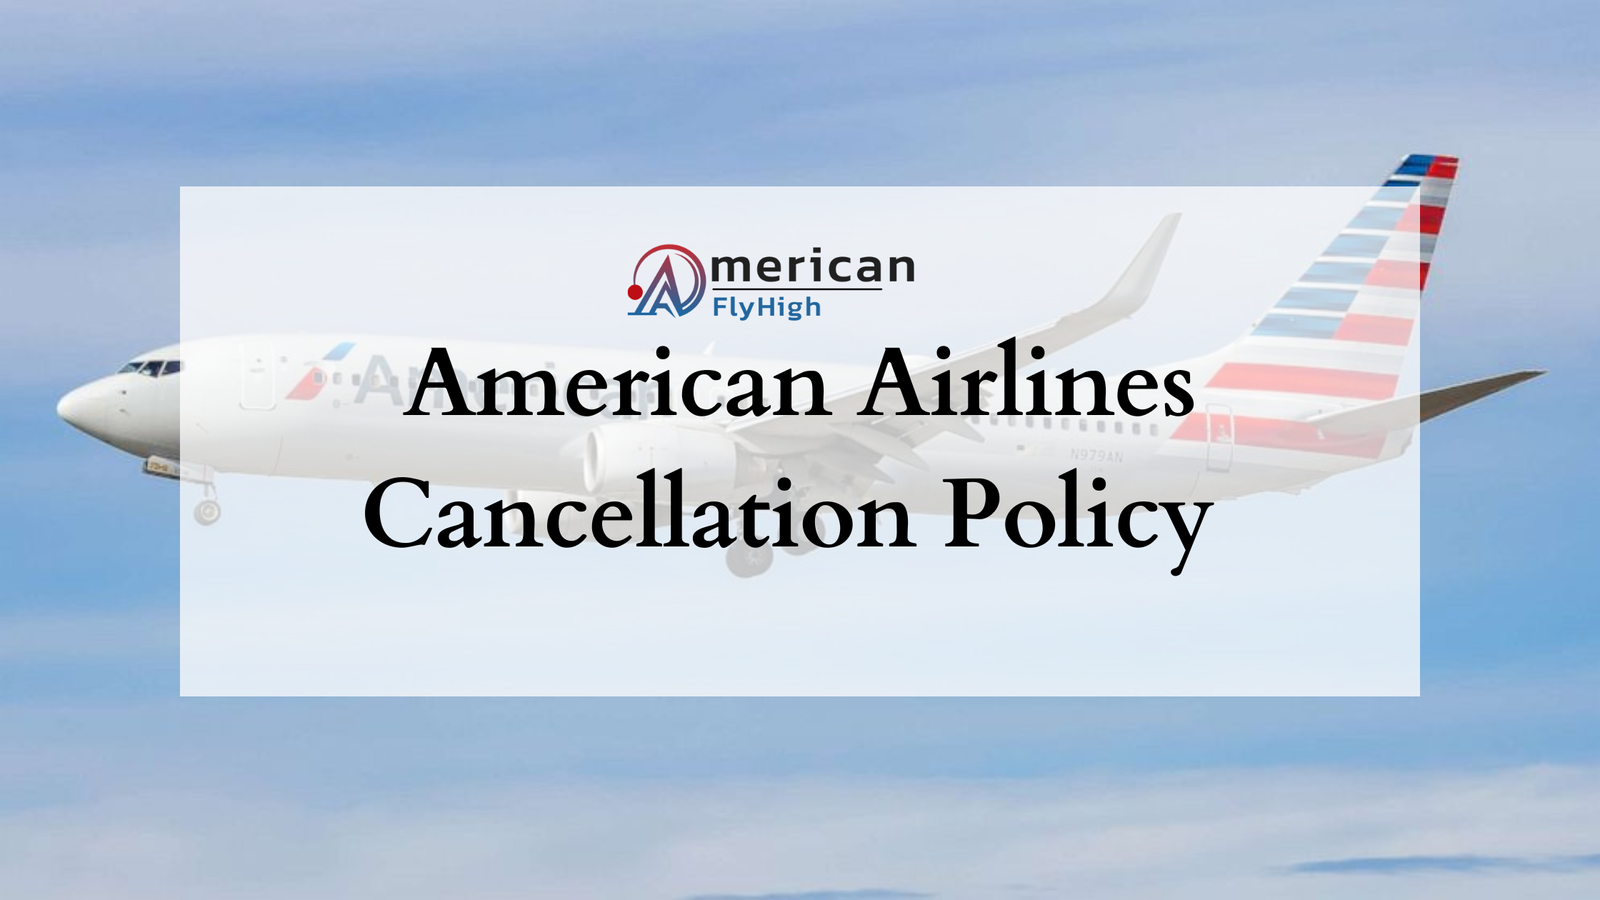 How do I cancel American Airlines flight tickets and get refund?